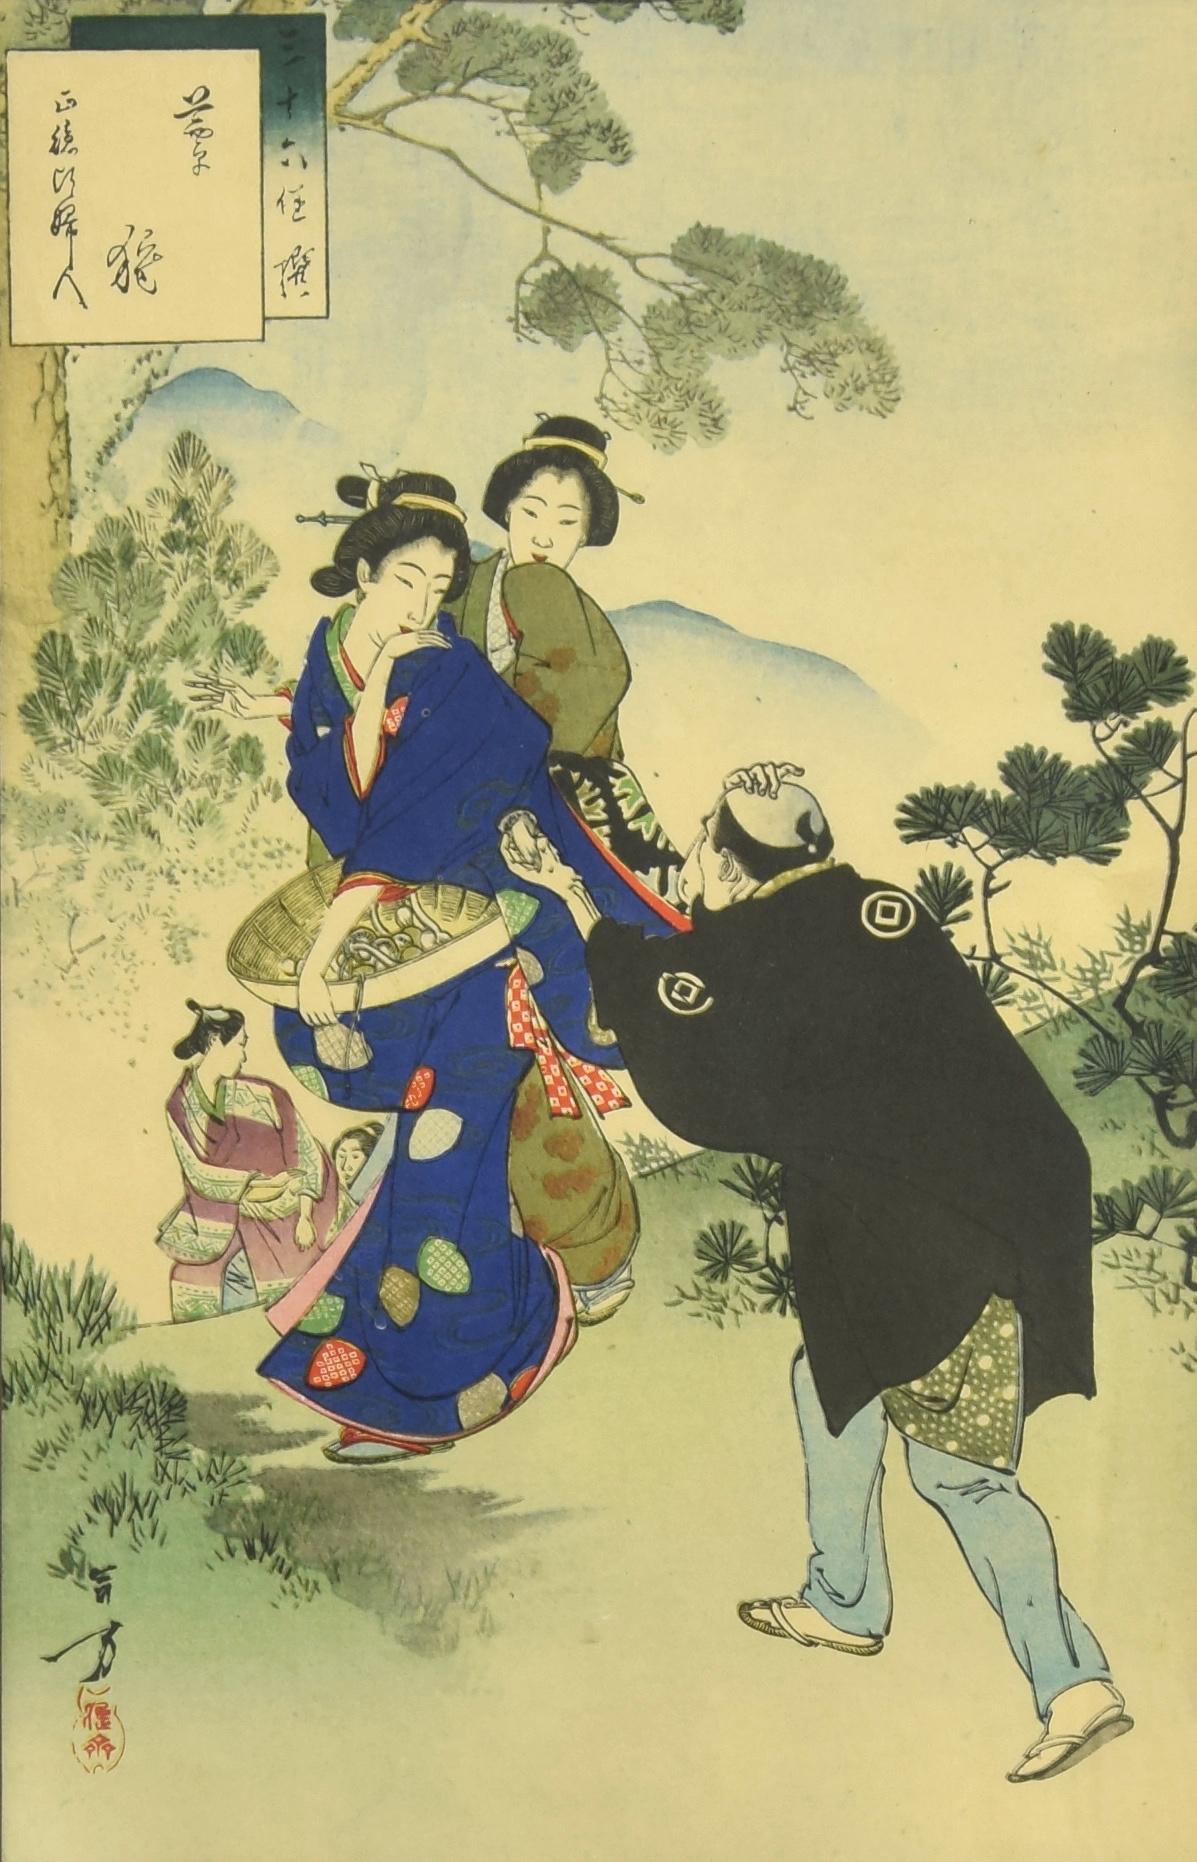 Collecting Mushrooms is a mixed colored offset print realized in 1959 from an original artwork of 1891-93 by Mizuno Toshikata (1866-1908) 

The artwork is from the harmonica book "Trentasei Grazie Giapponesi (36 graceful Japanese prints)" by Mario